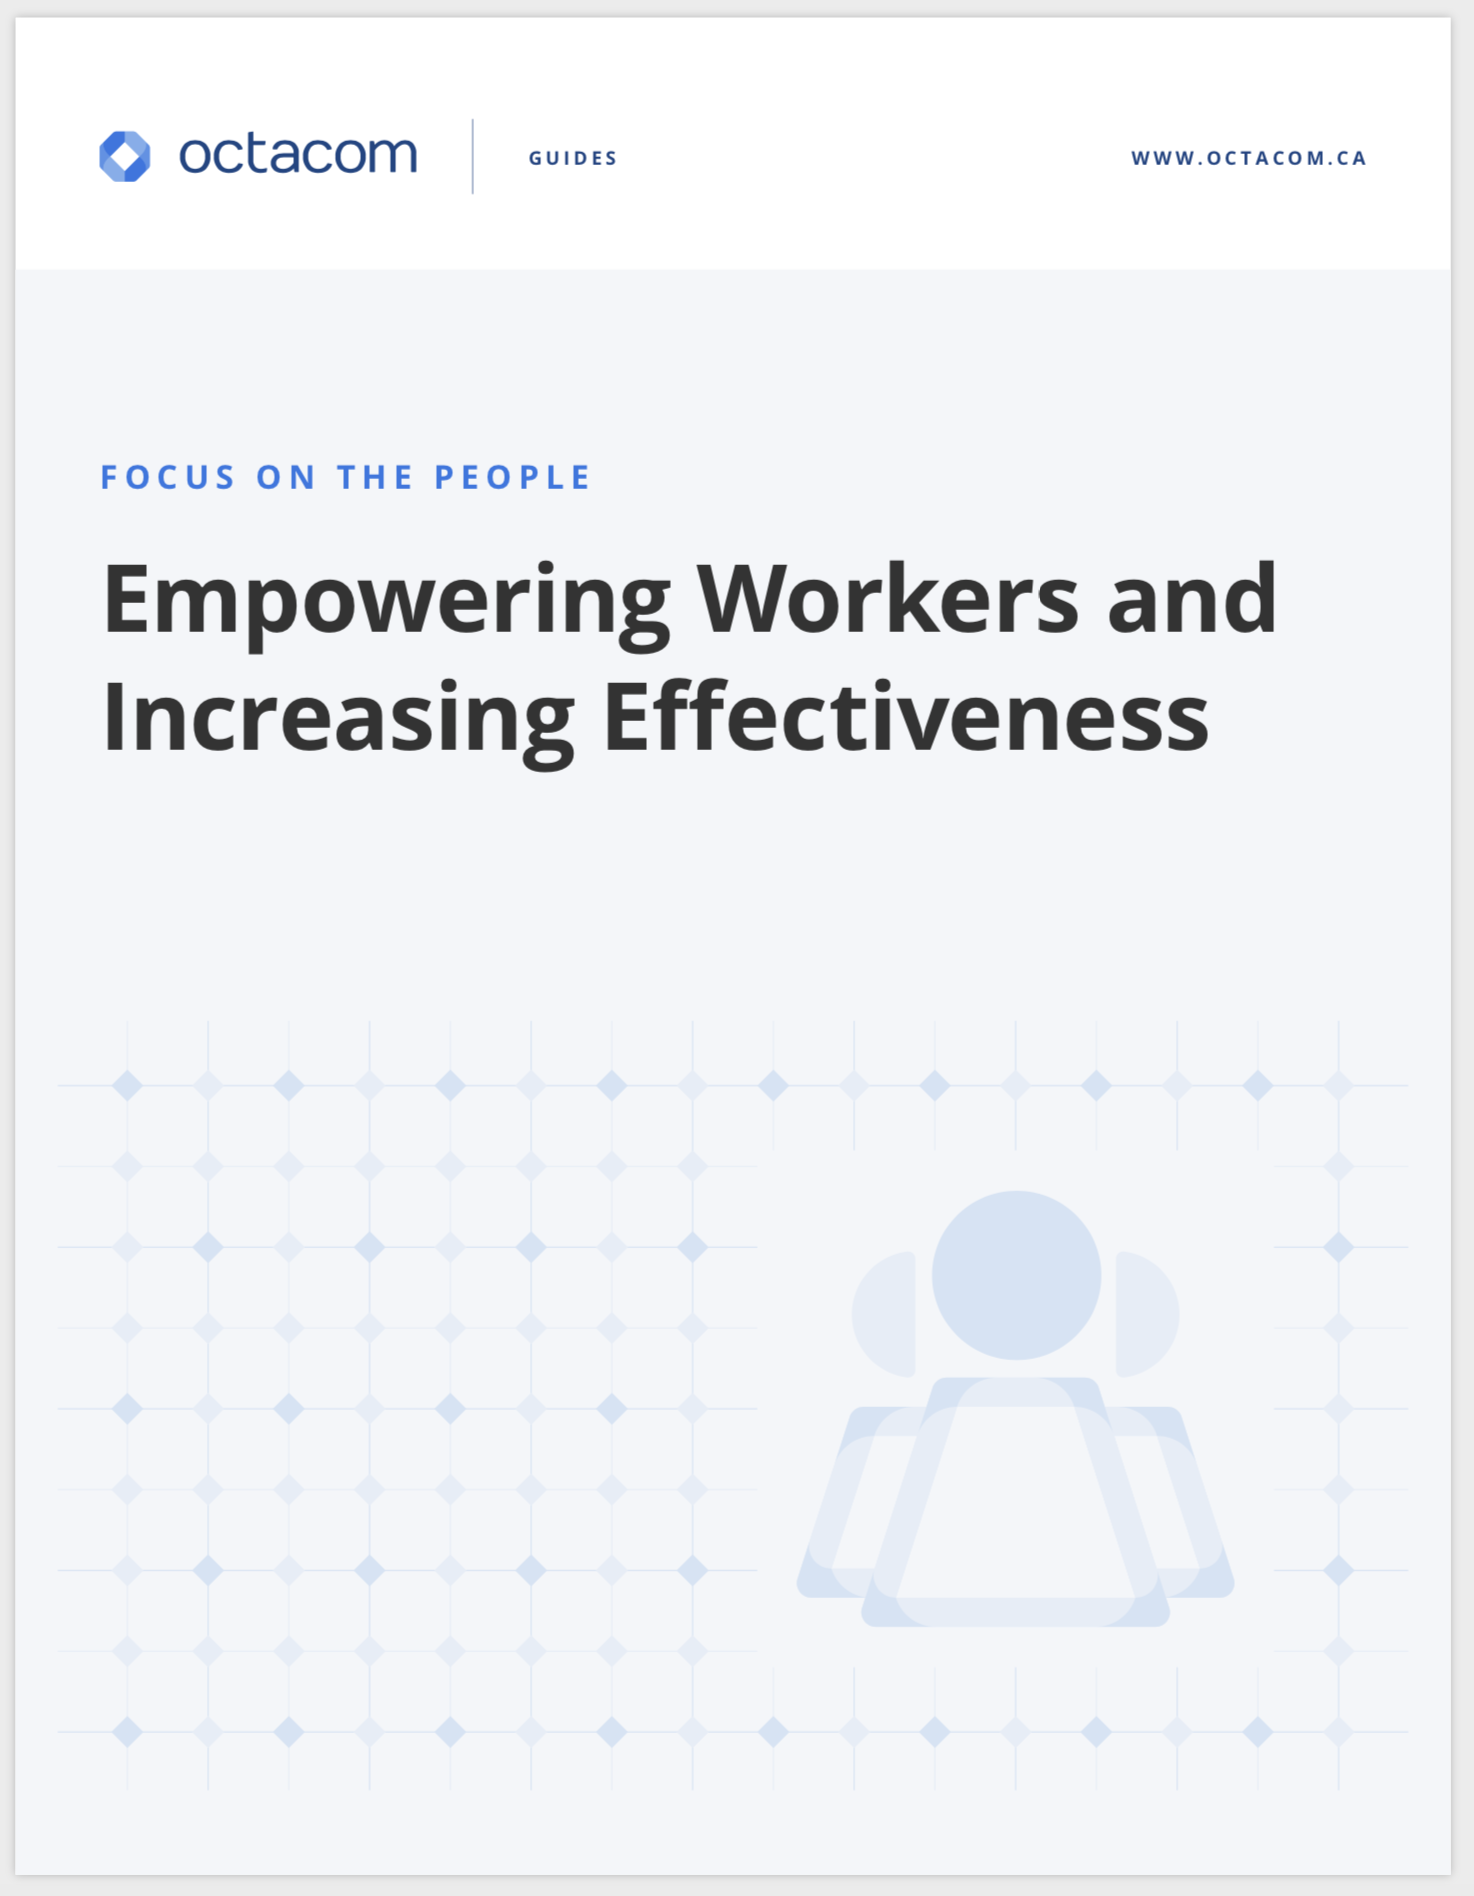 Empowering Workers and Increasing Effectiveness booklet